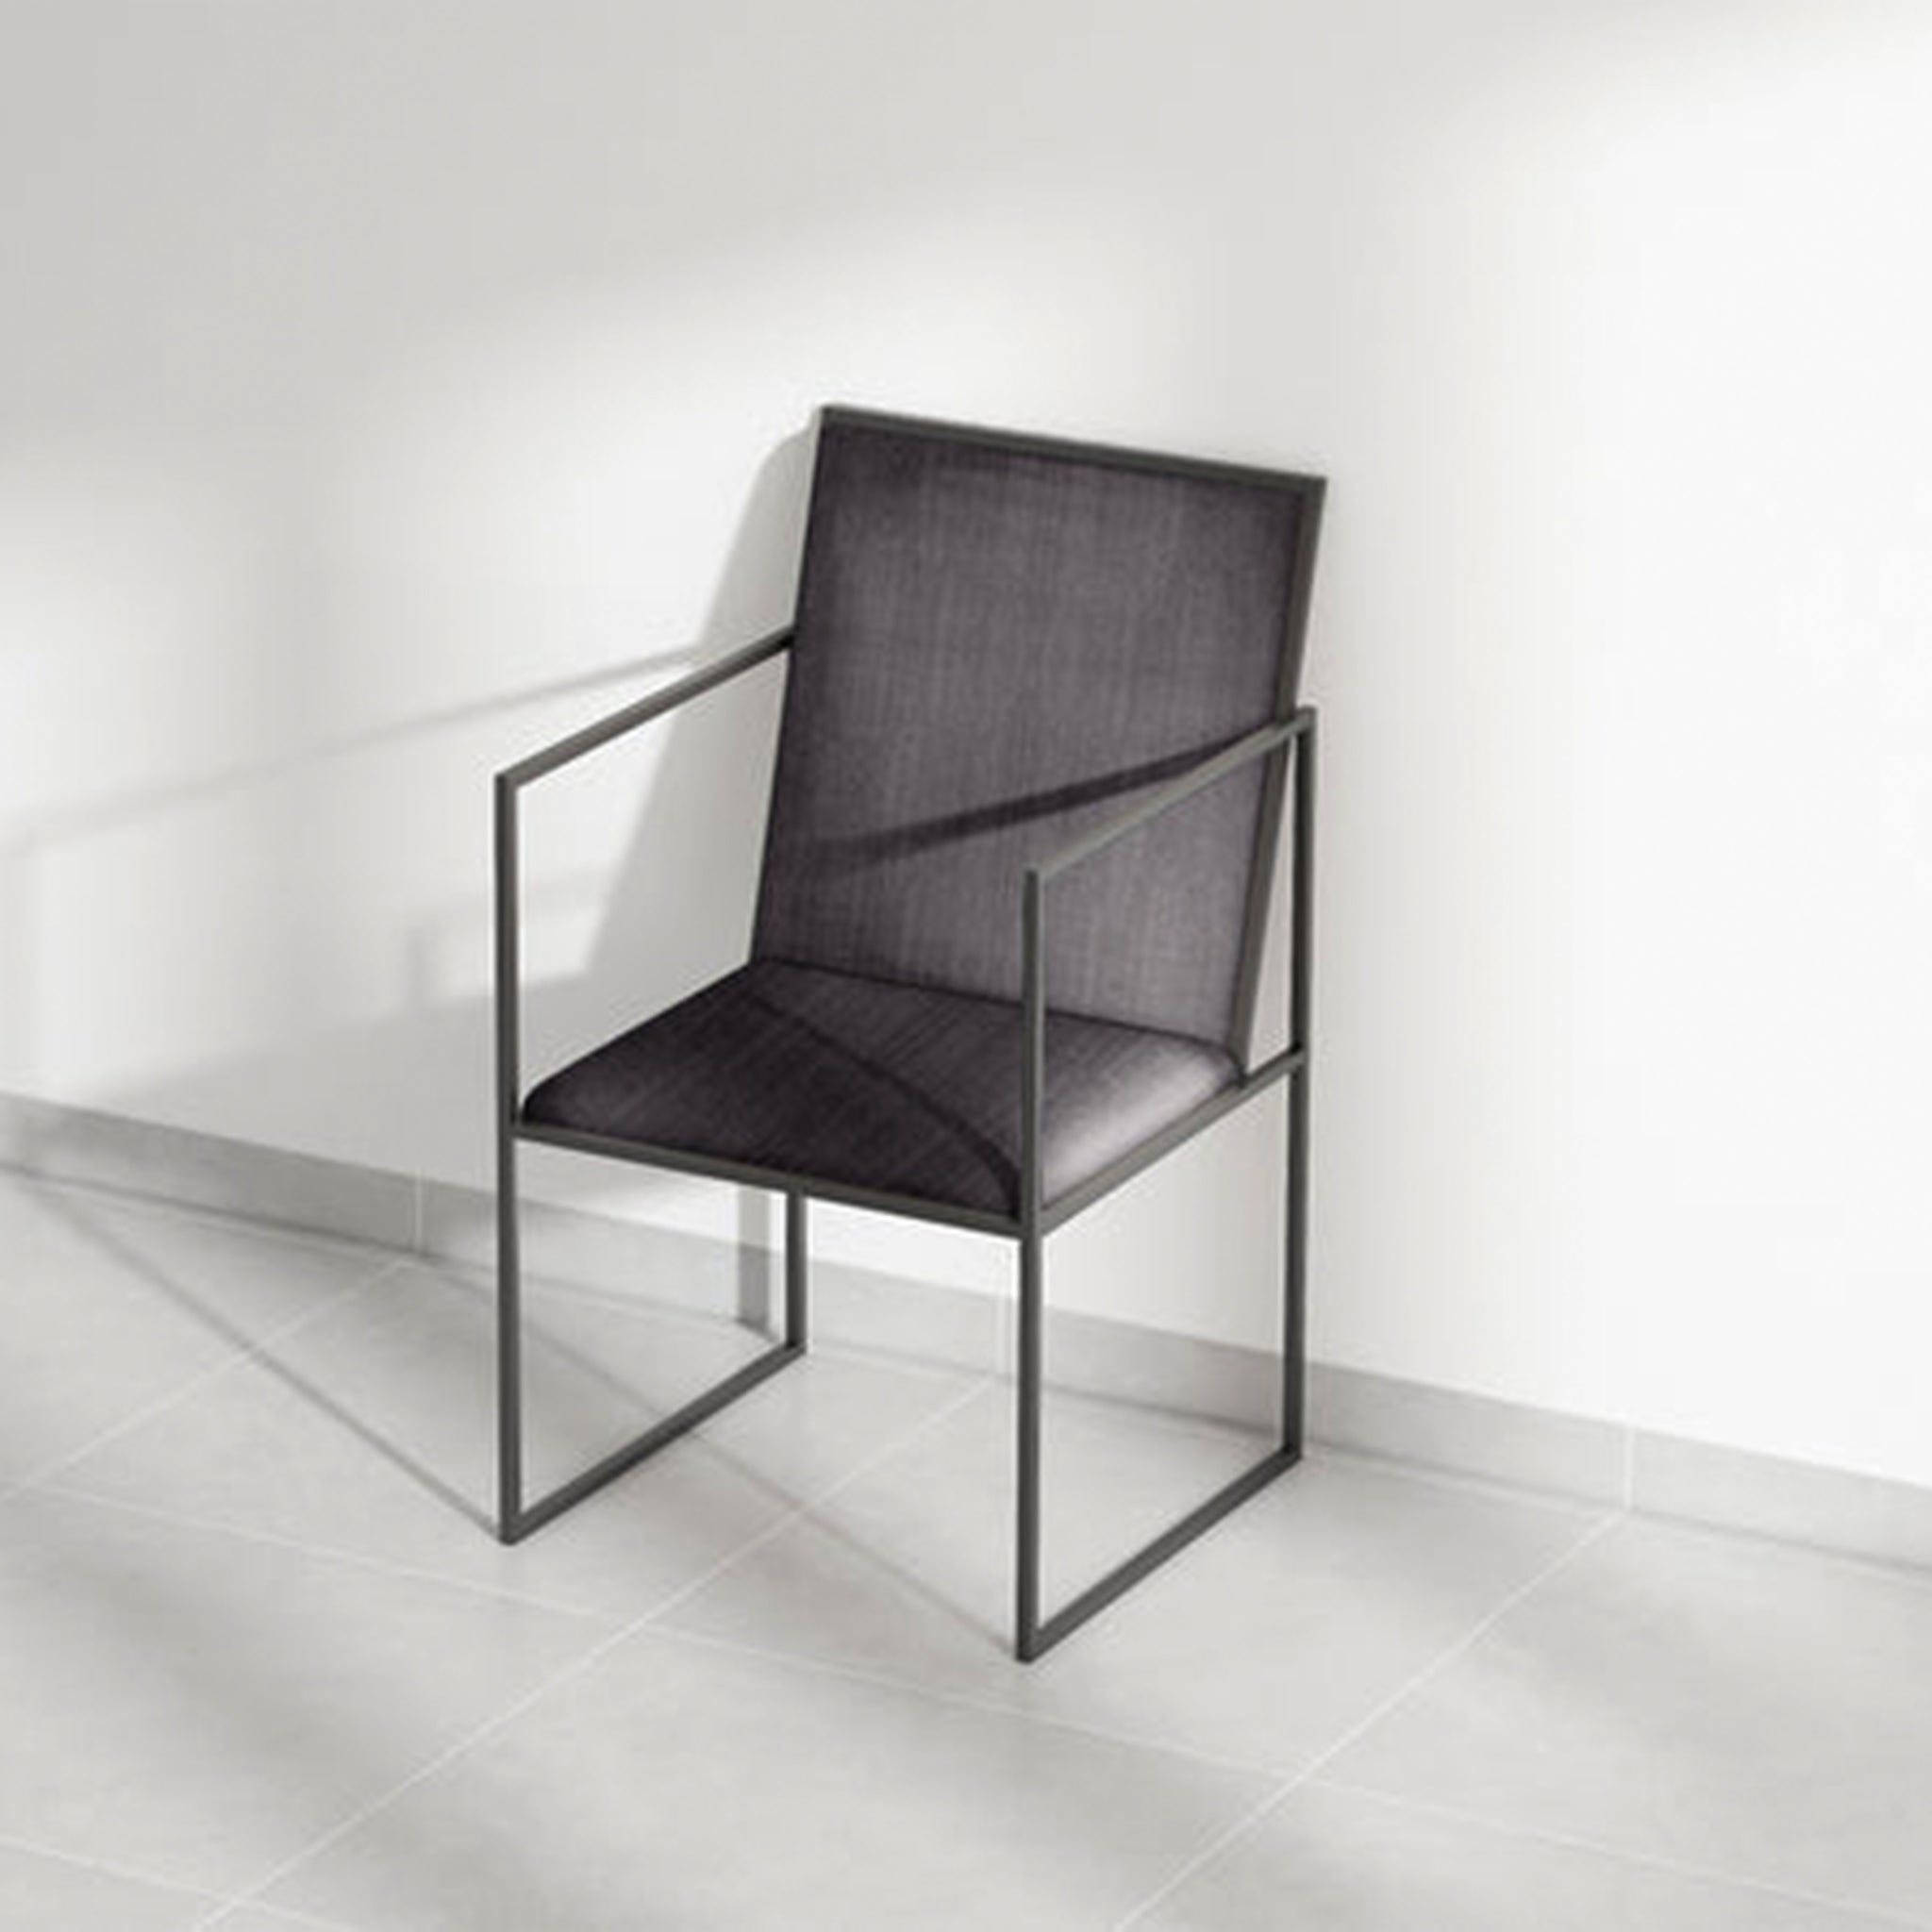 Minimalist dining chair with blue cushion and metal design